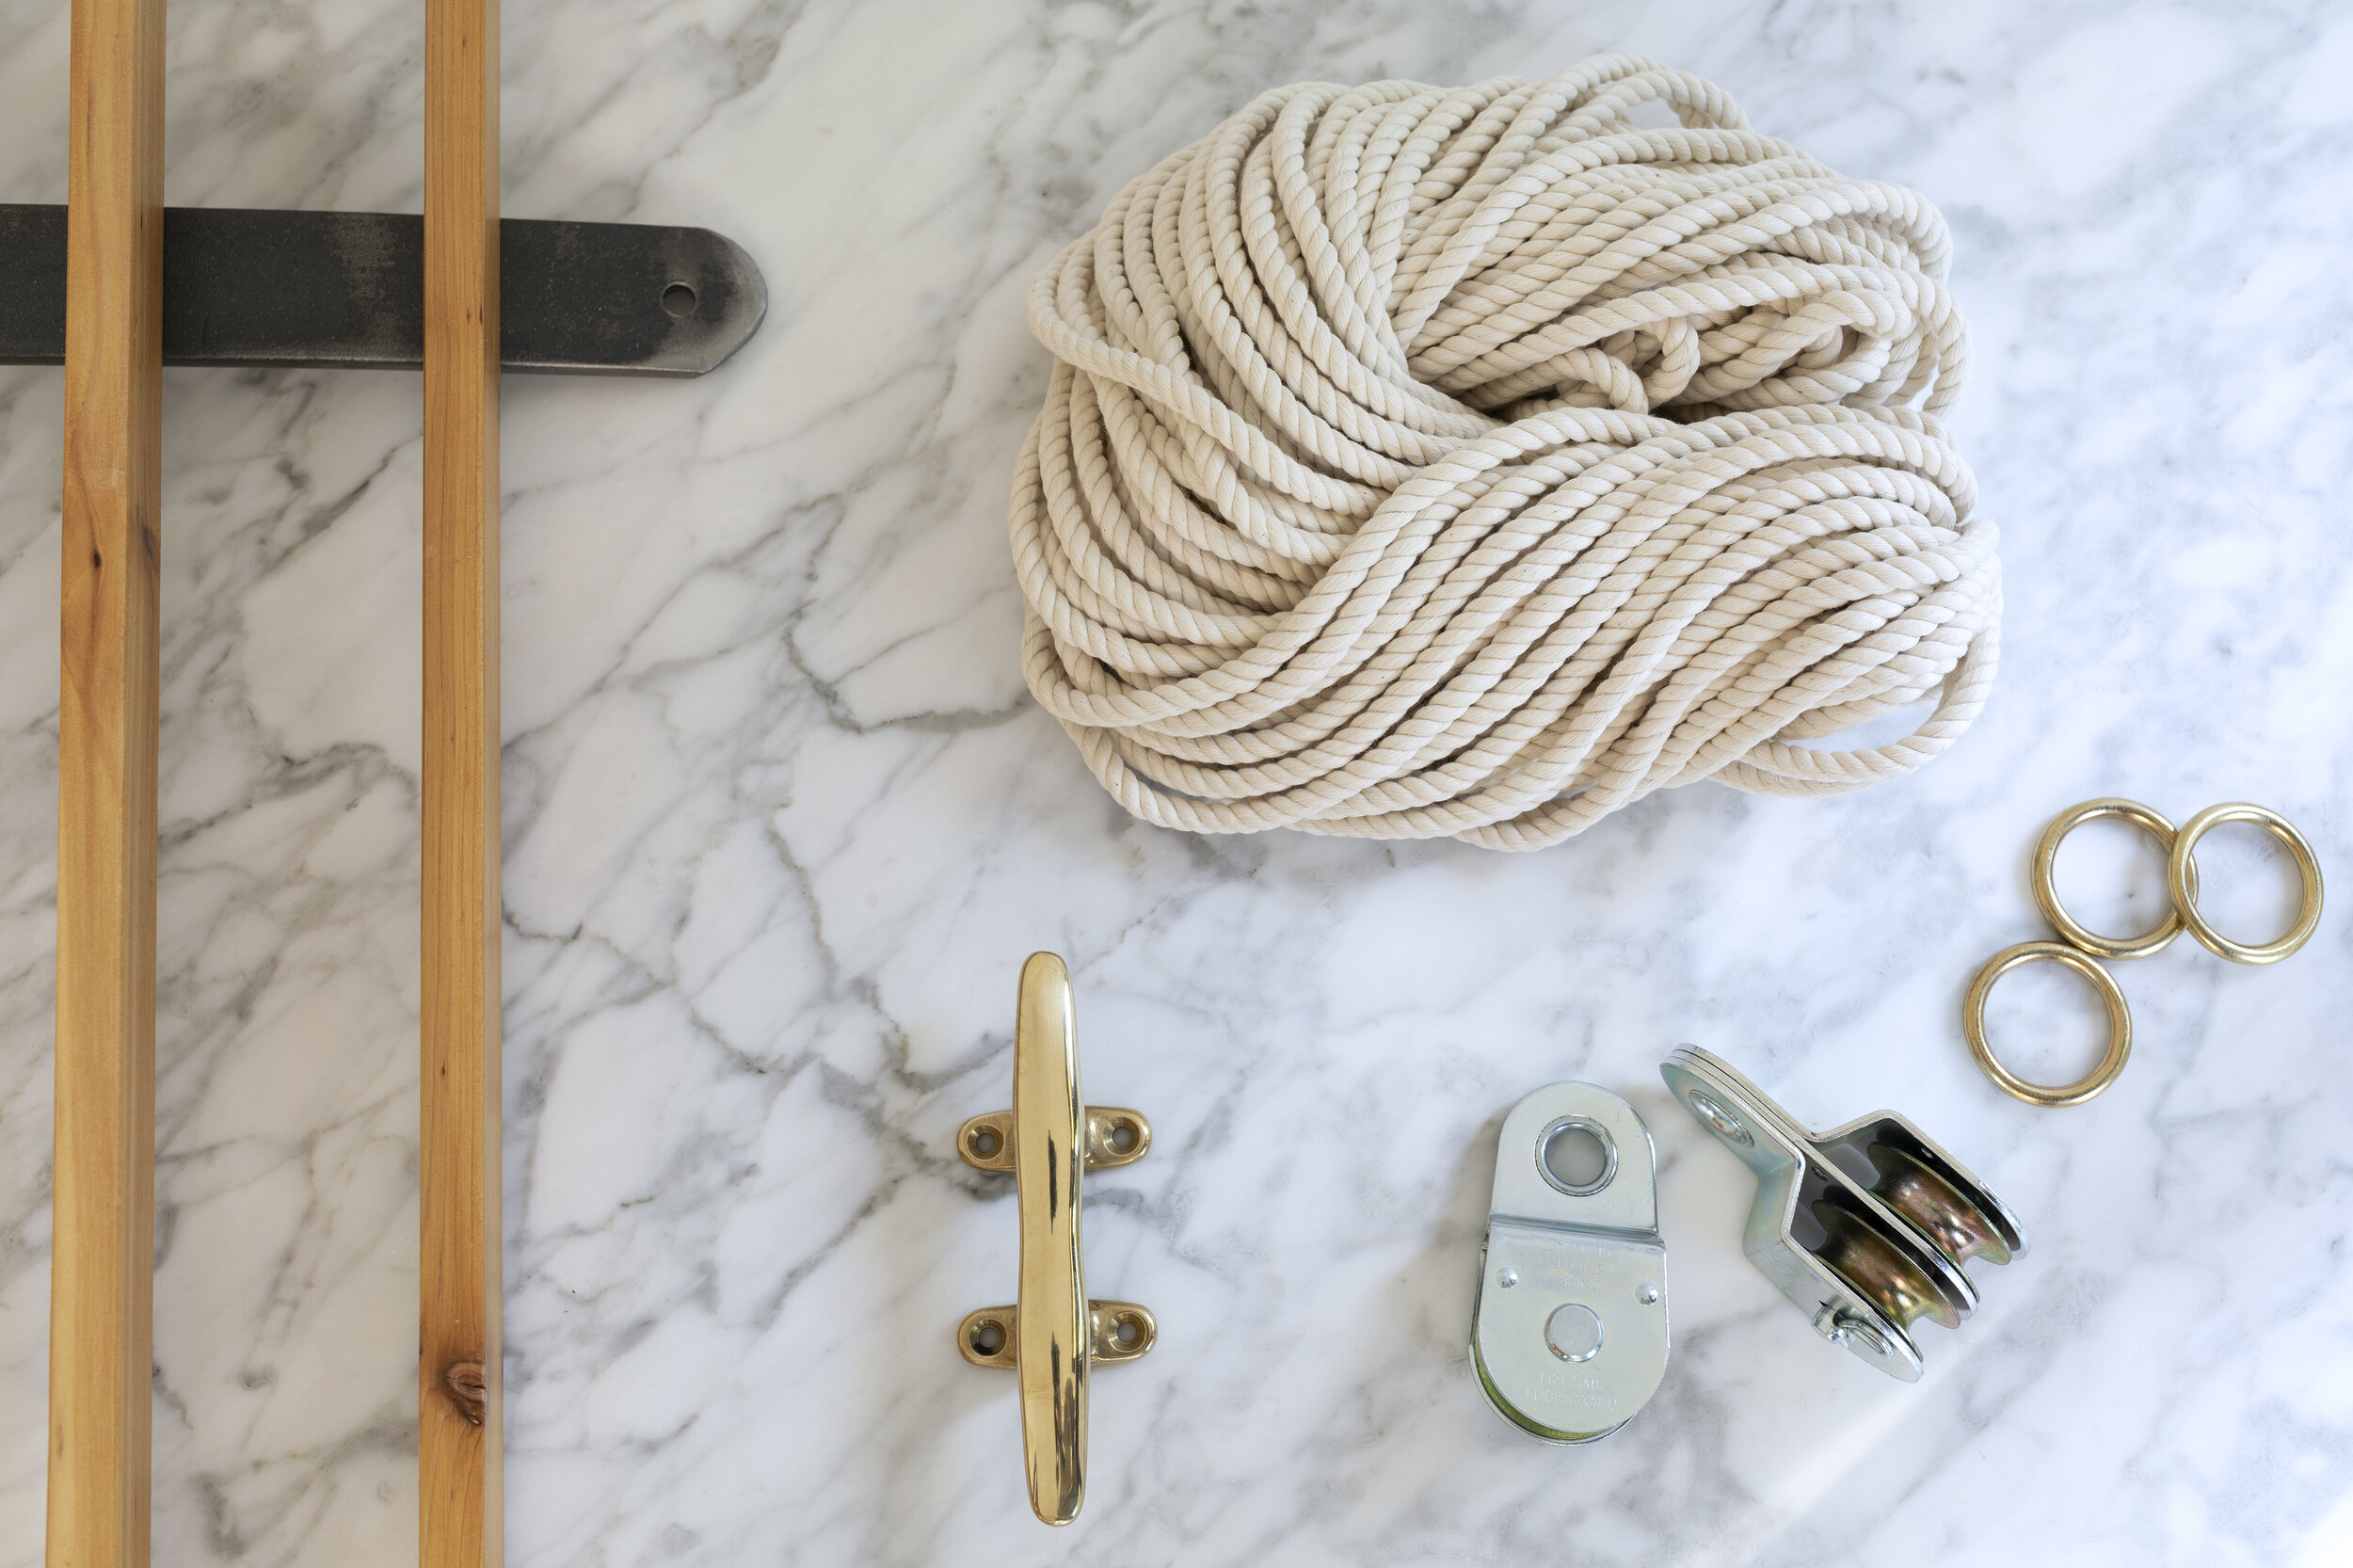 How To Build A Hanging Laundry Rack